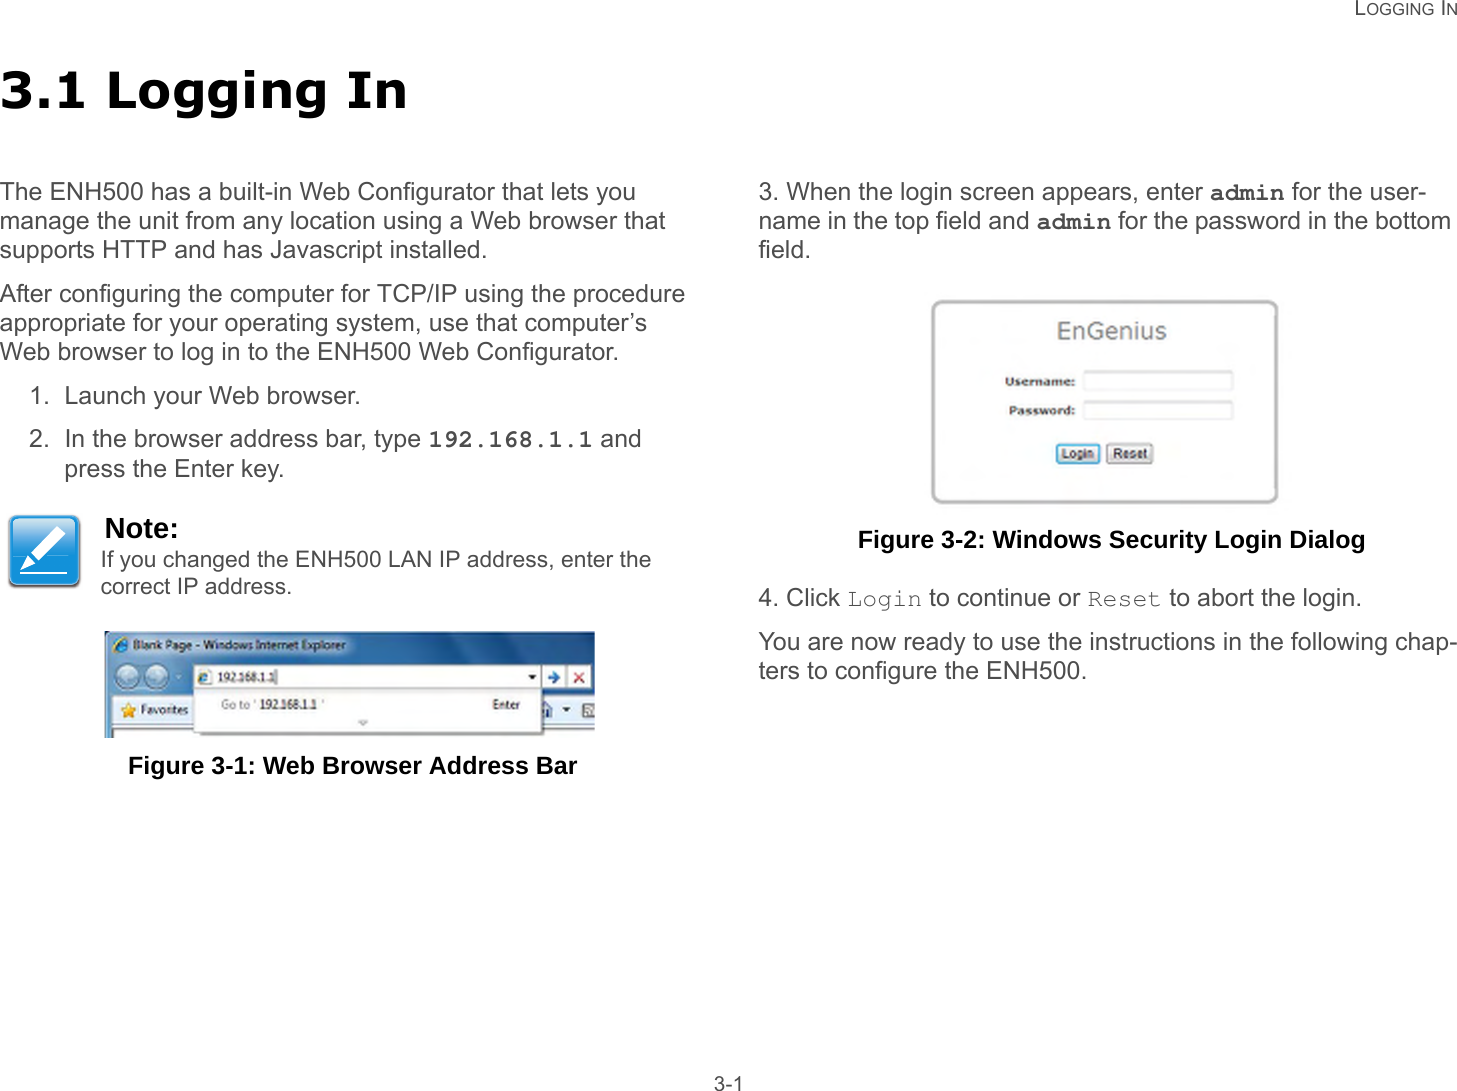   LOGGING IN 3-13.1 Logging InThe ENH500 has a built-in Web Configurator that lets you   manage the unit from any location using a Web browser that supports HTTP and has Javascript installed.After configuring the computer for TCP/IP using the procedure appropriate for your operating system, use that computer’s Web browser to log in to the ENH500 Web Configurator.1. Launch your Web browser.2. In the browser address bar, type 192.168.1.1 and press the Enter key. Figure 3-1: Web Browser Address Bar3. When the login screen appears, enter admin for the user-name in the top field and admin for the password in the bottom field. Figure 3-2: Windows Security Login Dialog4. Click Login to continue or Reset to abort the login.You are now ready to use the instructions in the following chap-ters to configure the ENH500.Note:If you changed the ENH500 LAN IP address, enter the correct IP address.